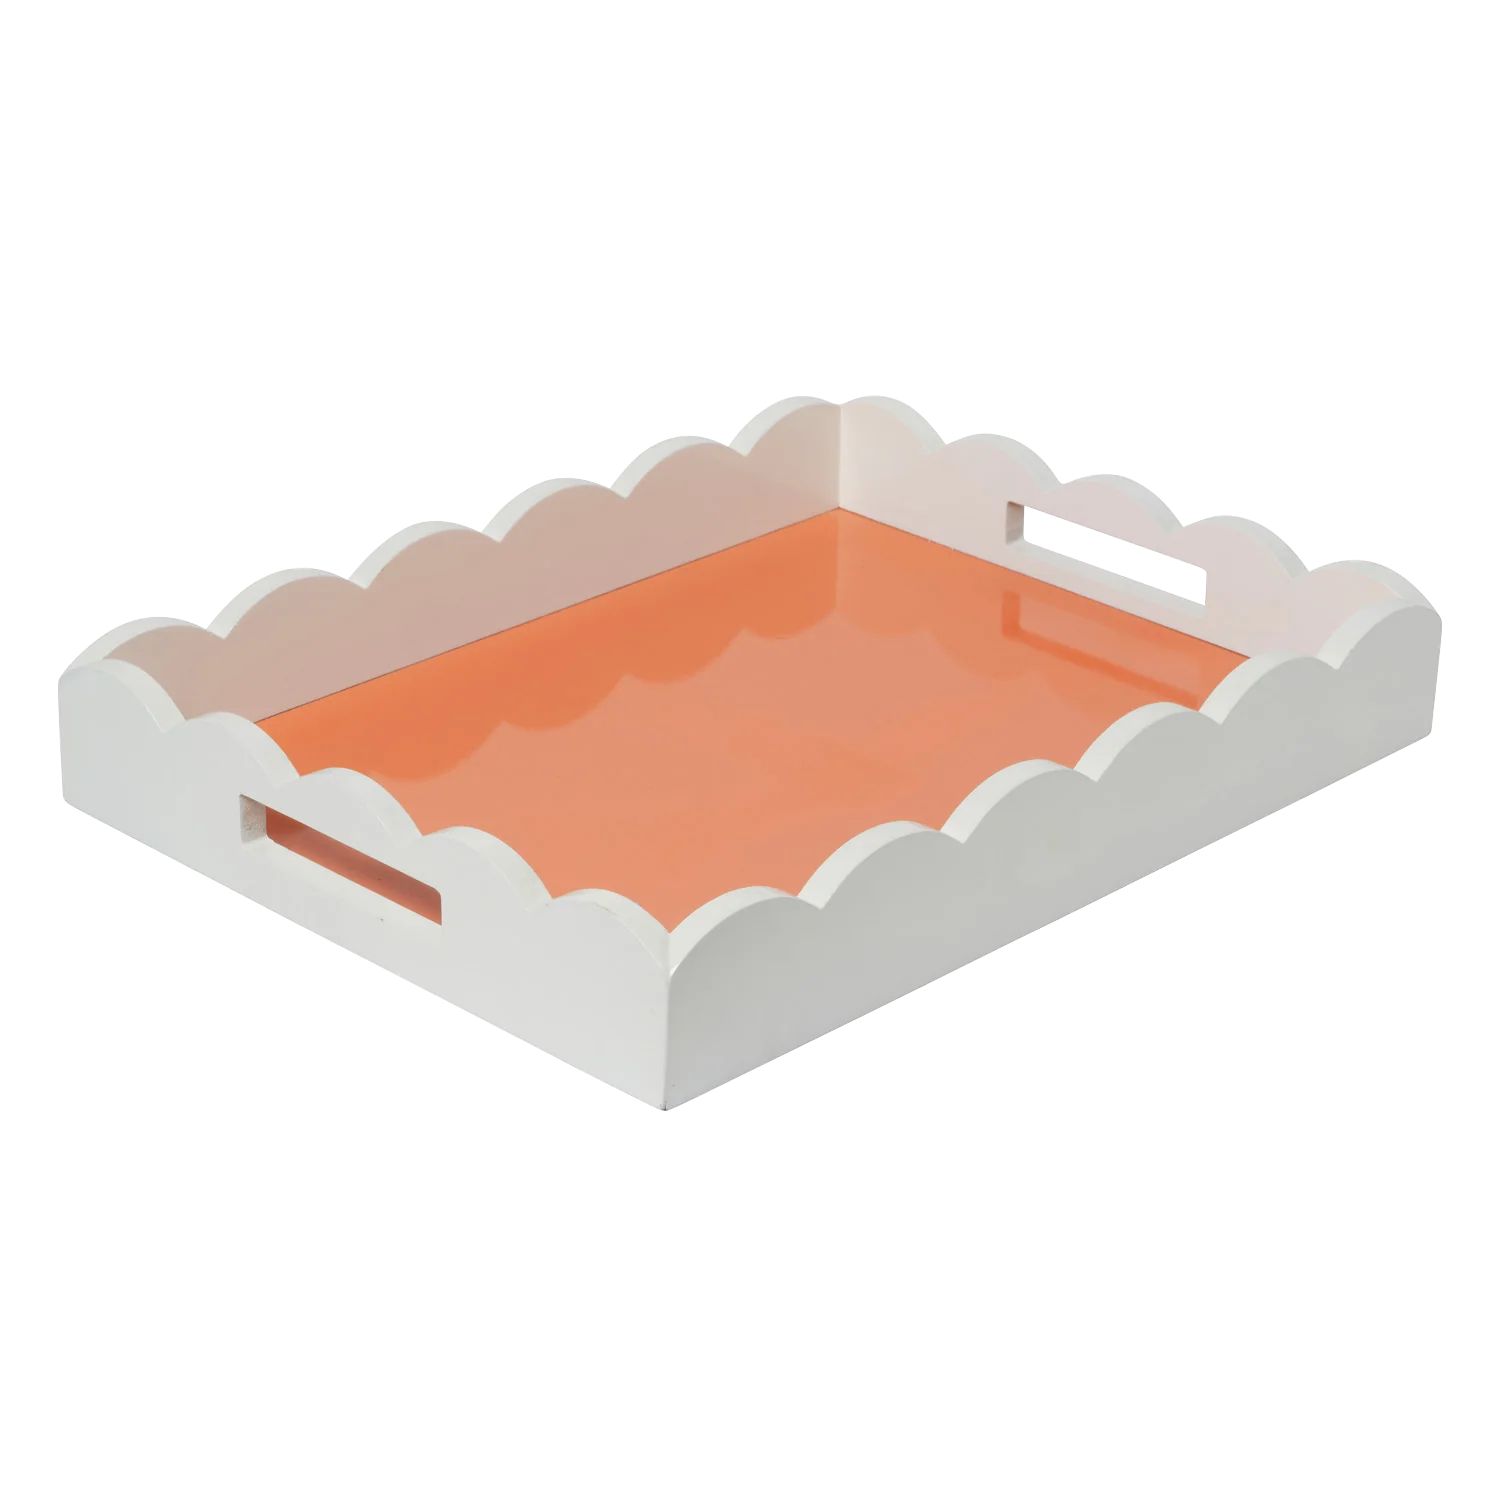 Large Rectangular White and Apricot Scalloped Tray | In the Roundhouse